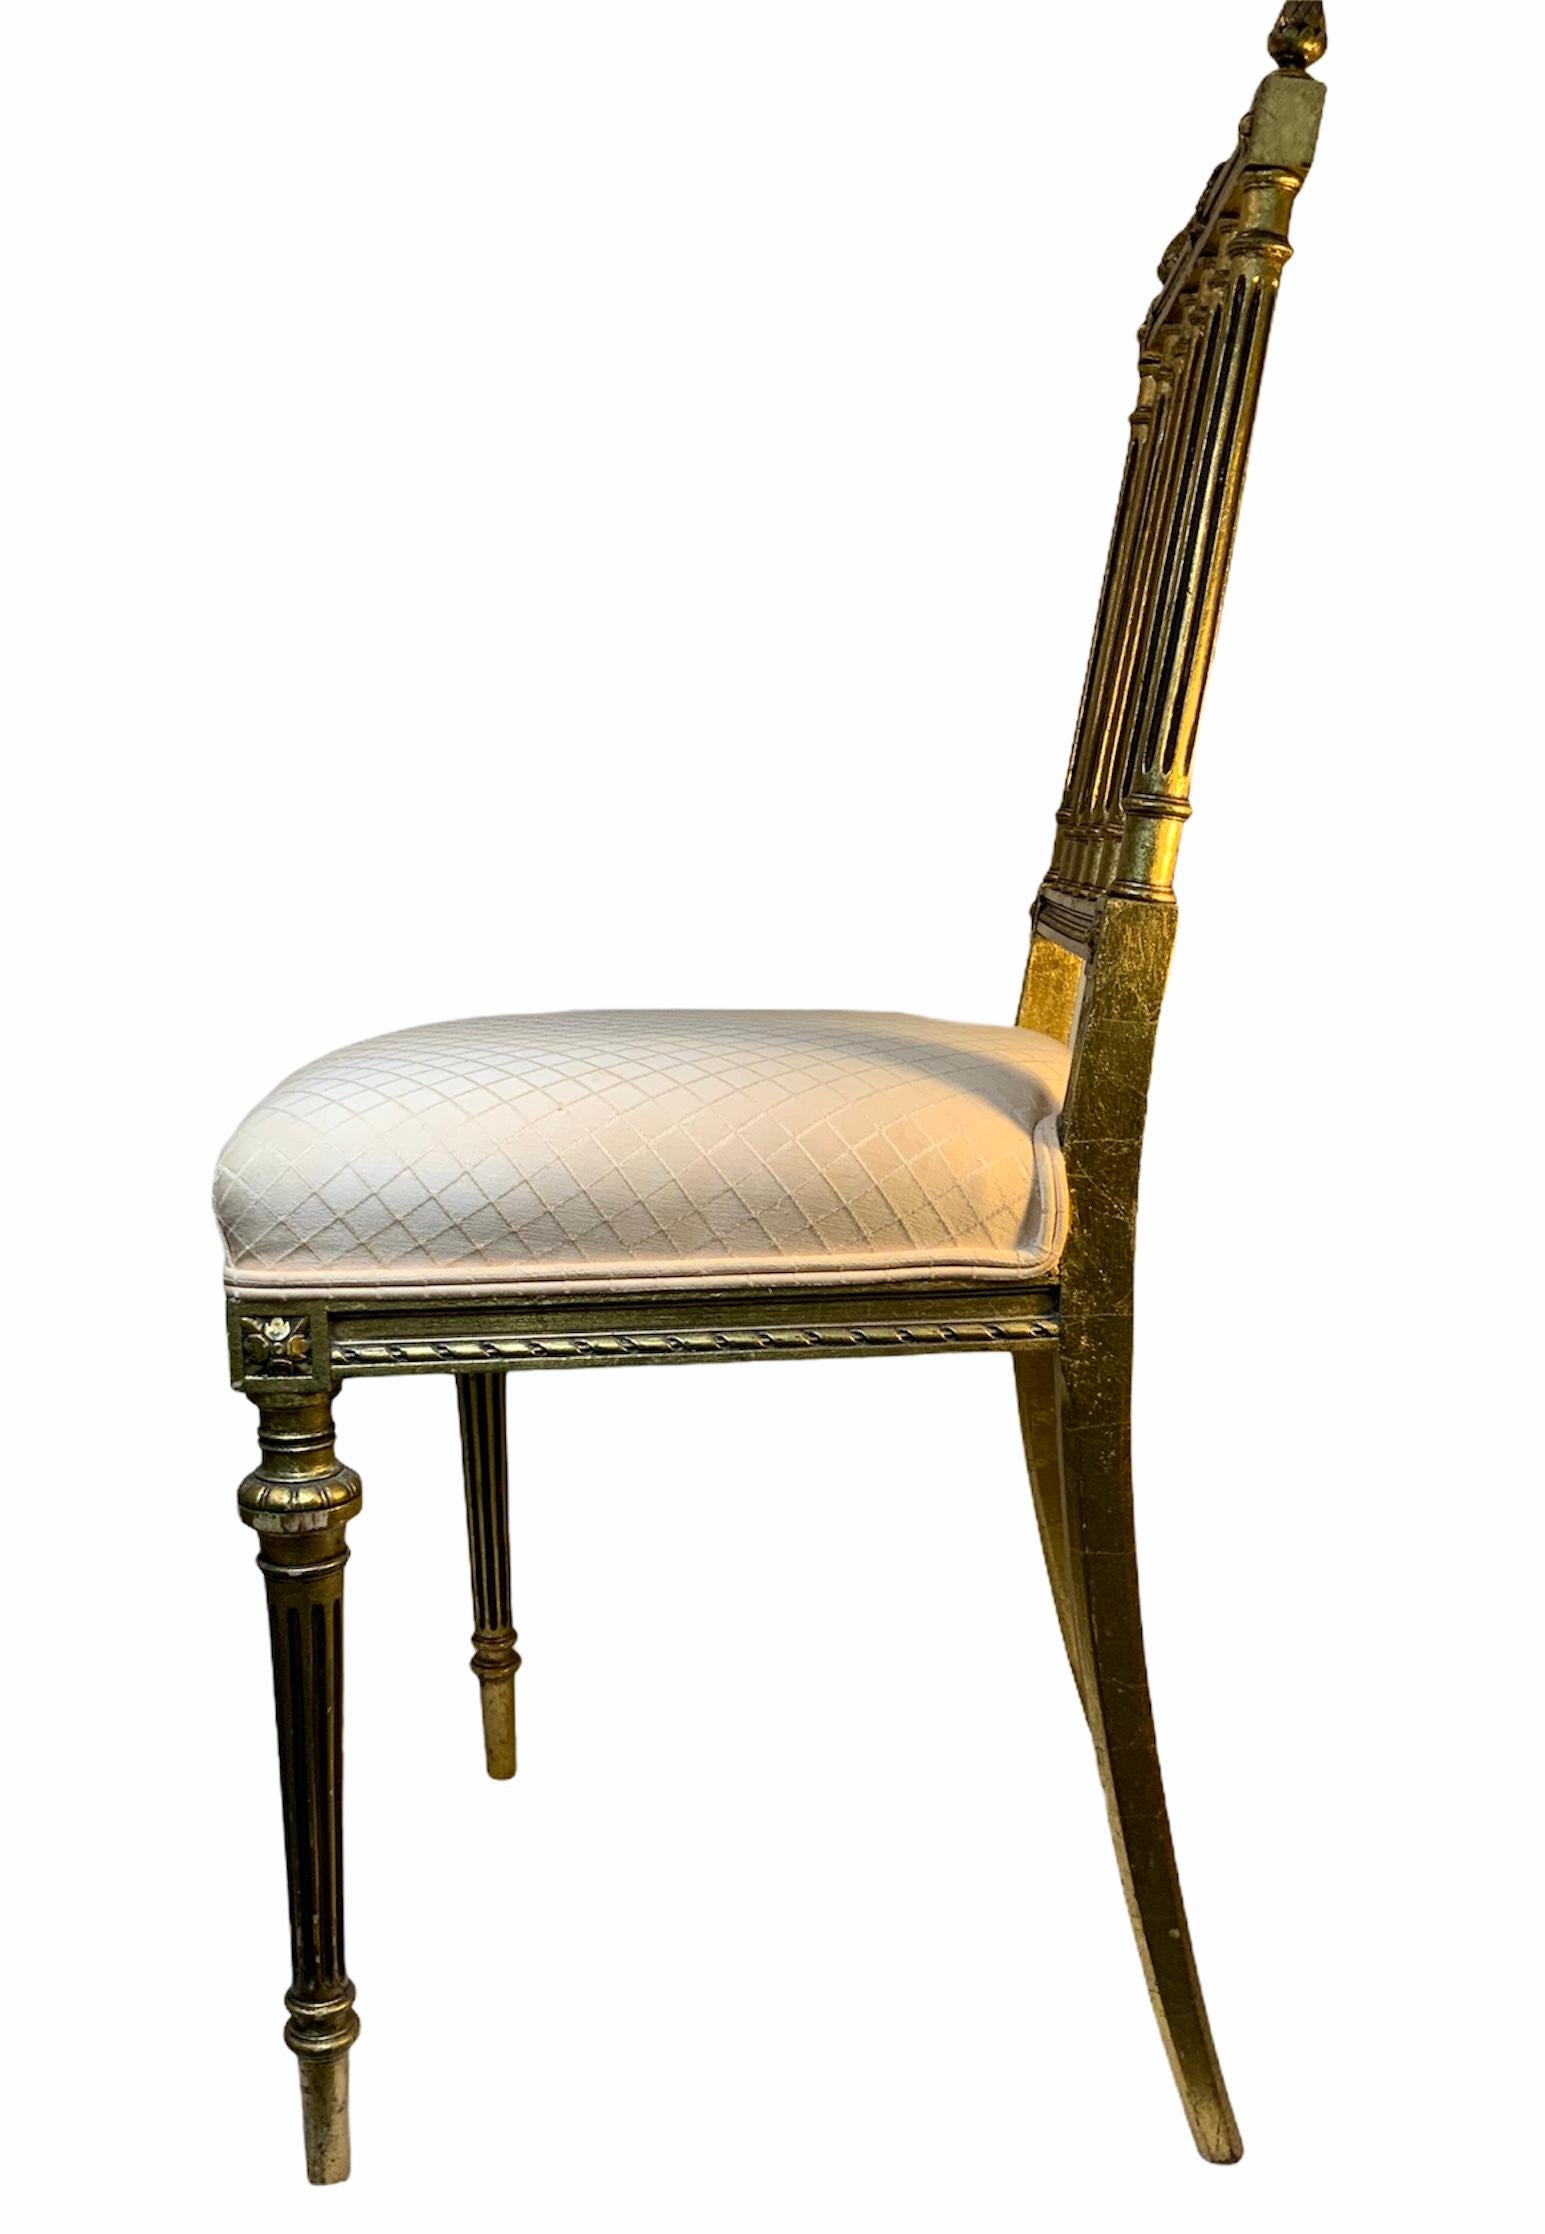 Sheraton Style Pair of Gilt Wood Parlor Chairs 1